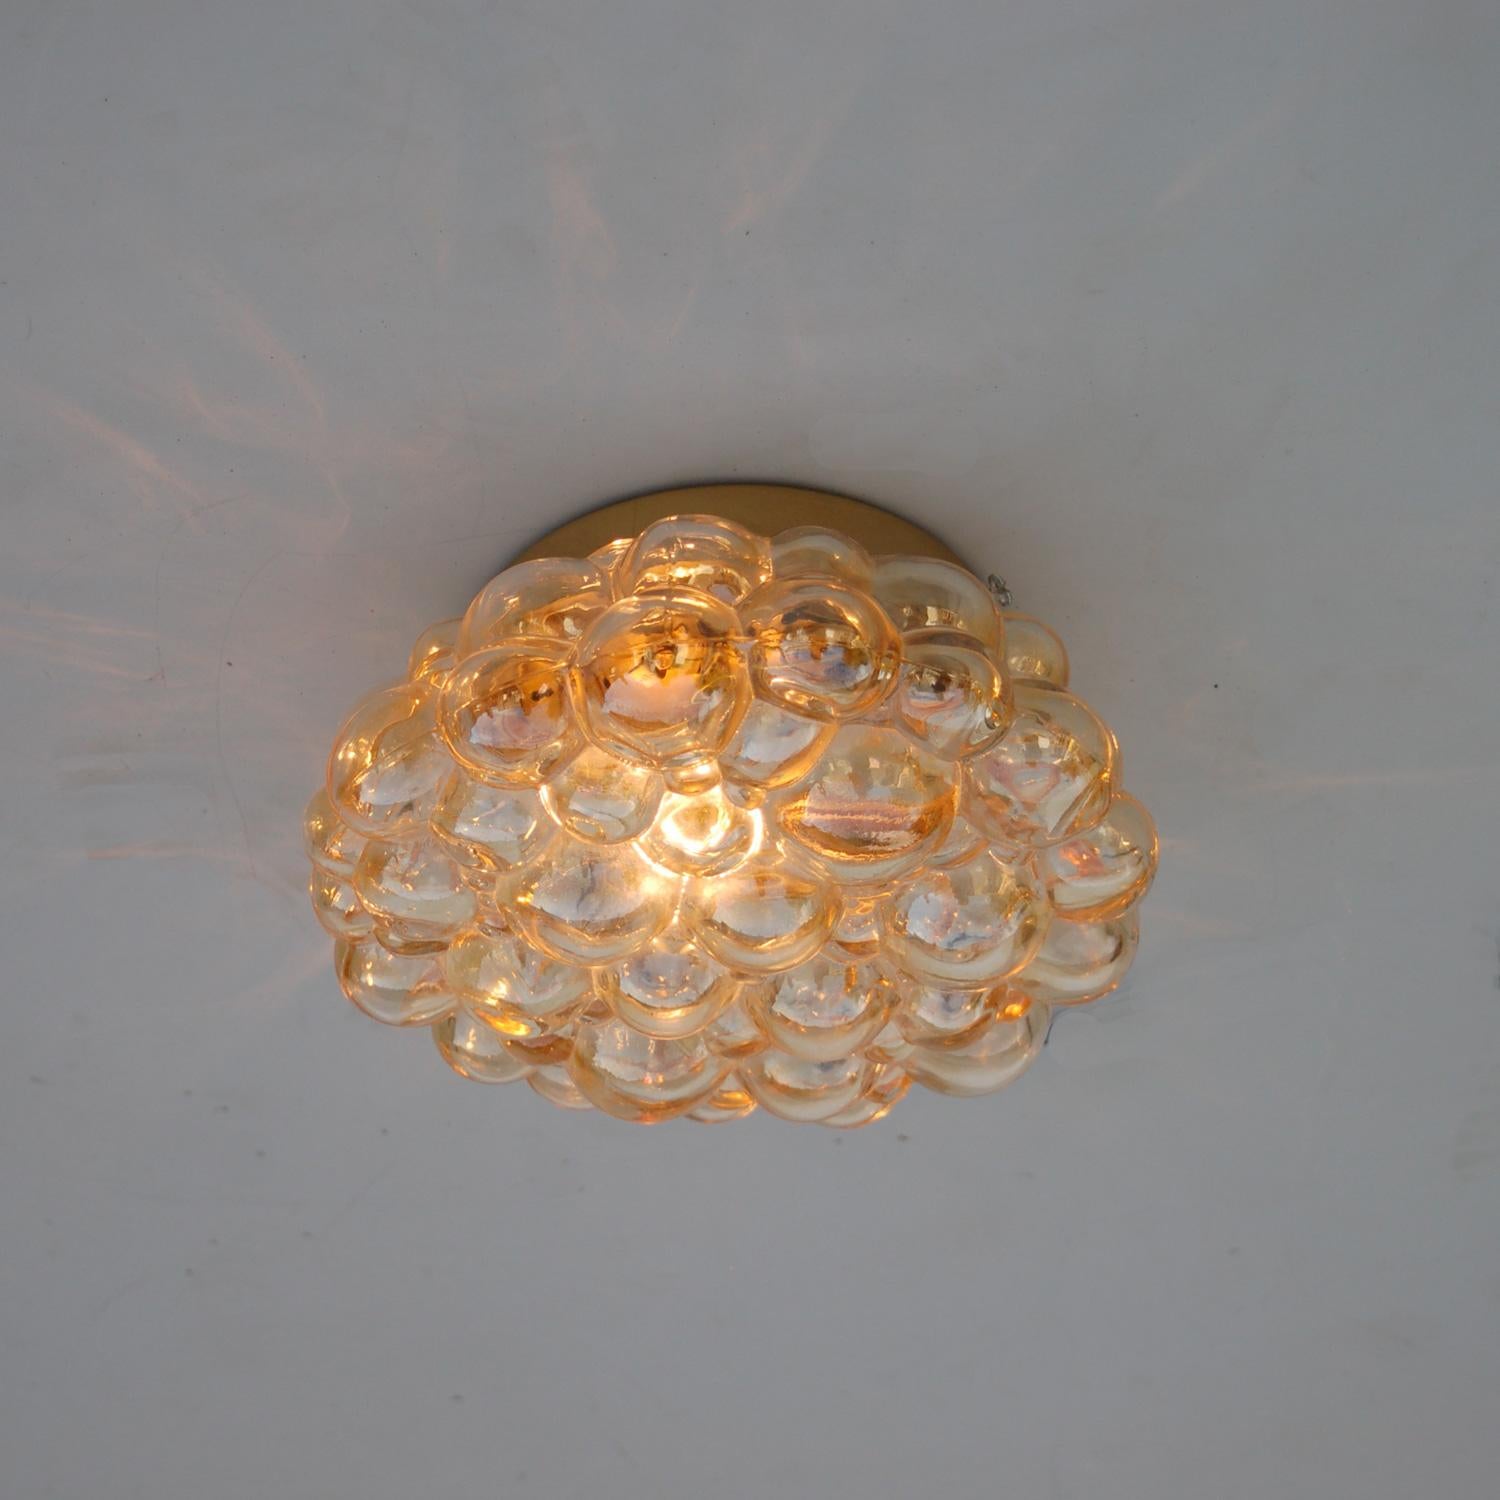 Amber Bubble Ceiling Light by Helena Tynell, circa 1960s (Deutsch)